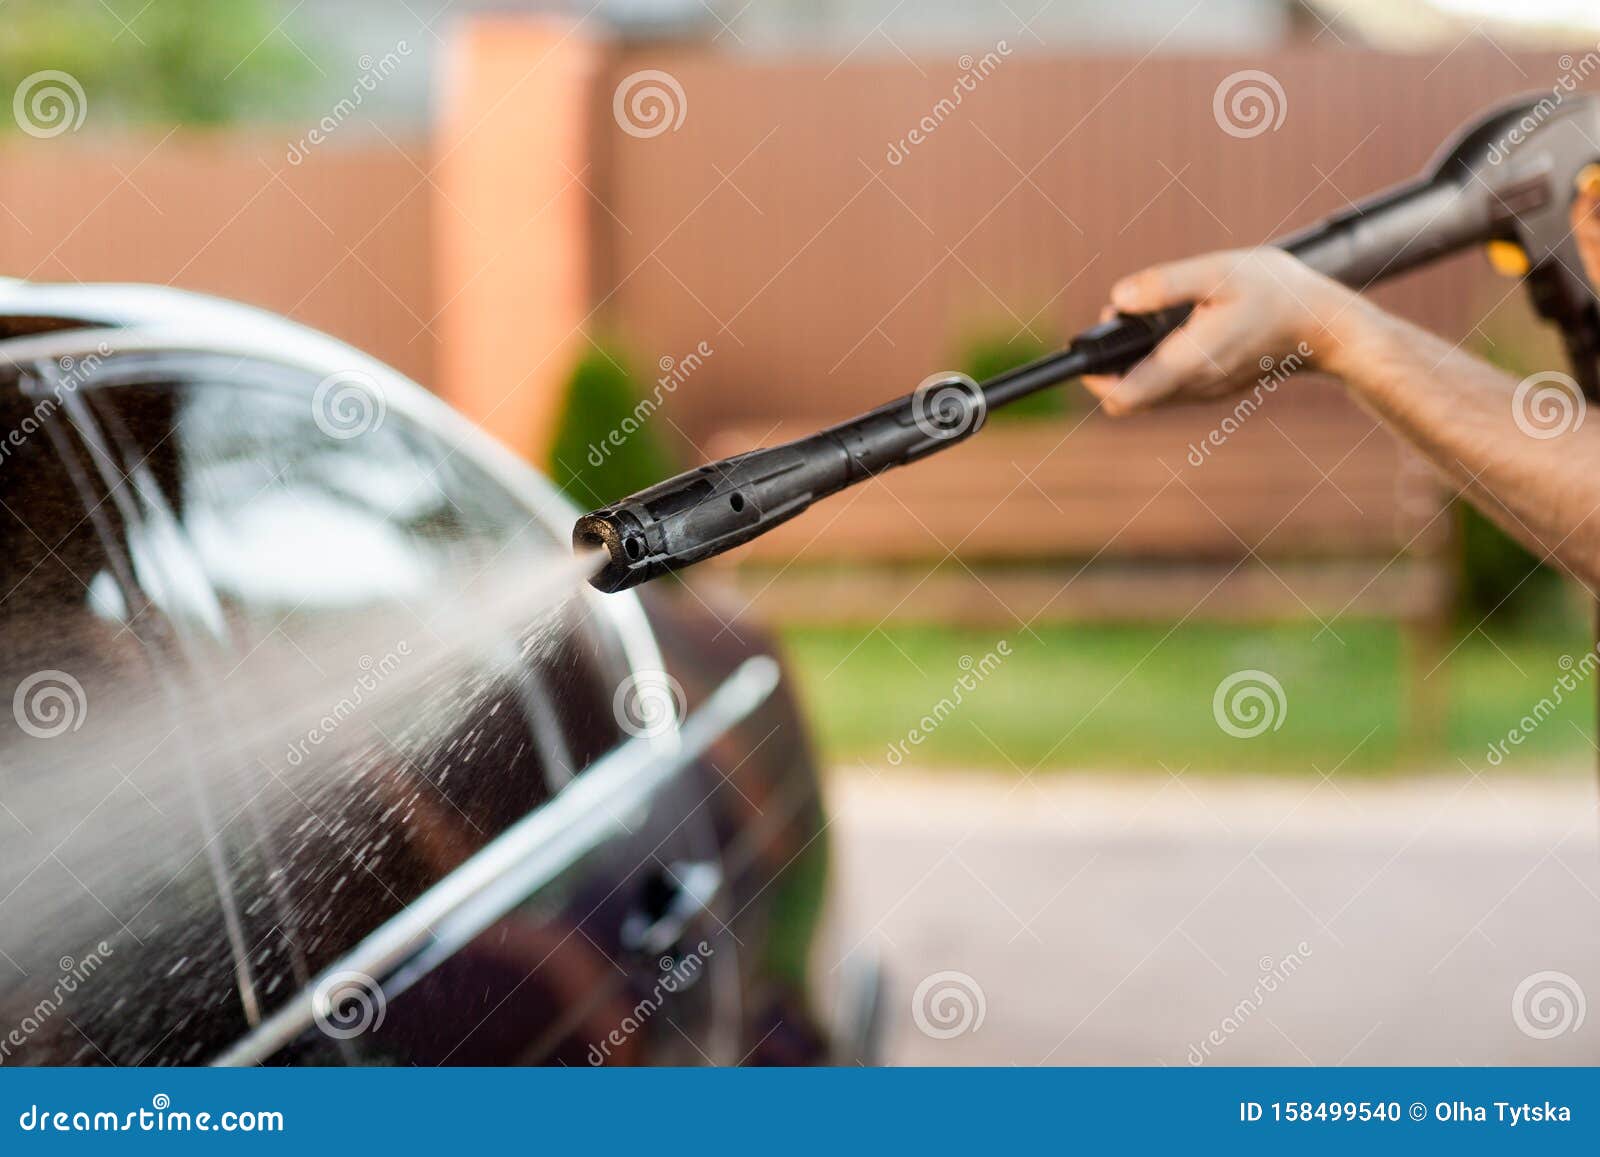 a man washes his car with a large head of water from a karcher on open air. close up photo